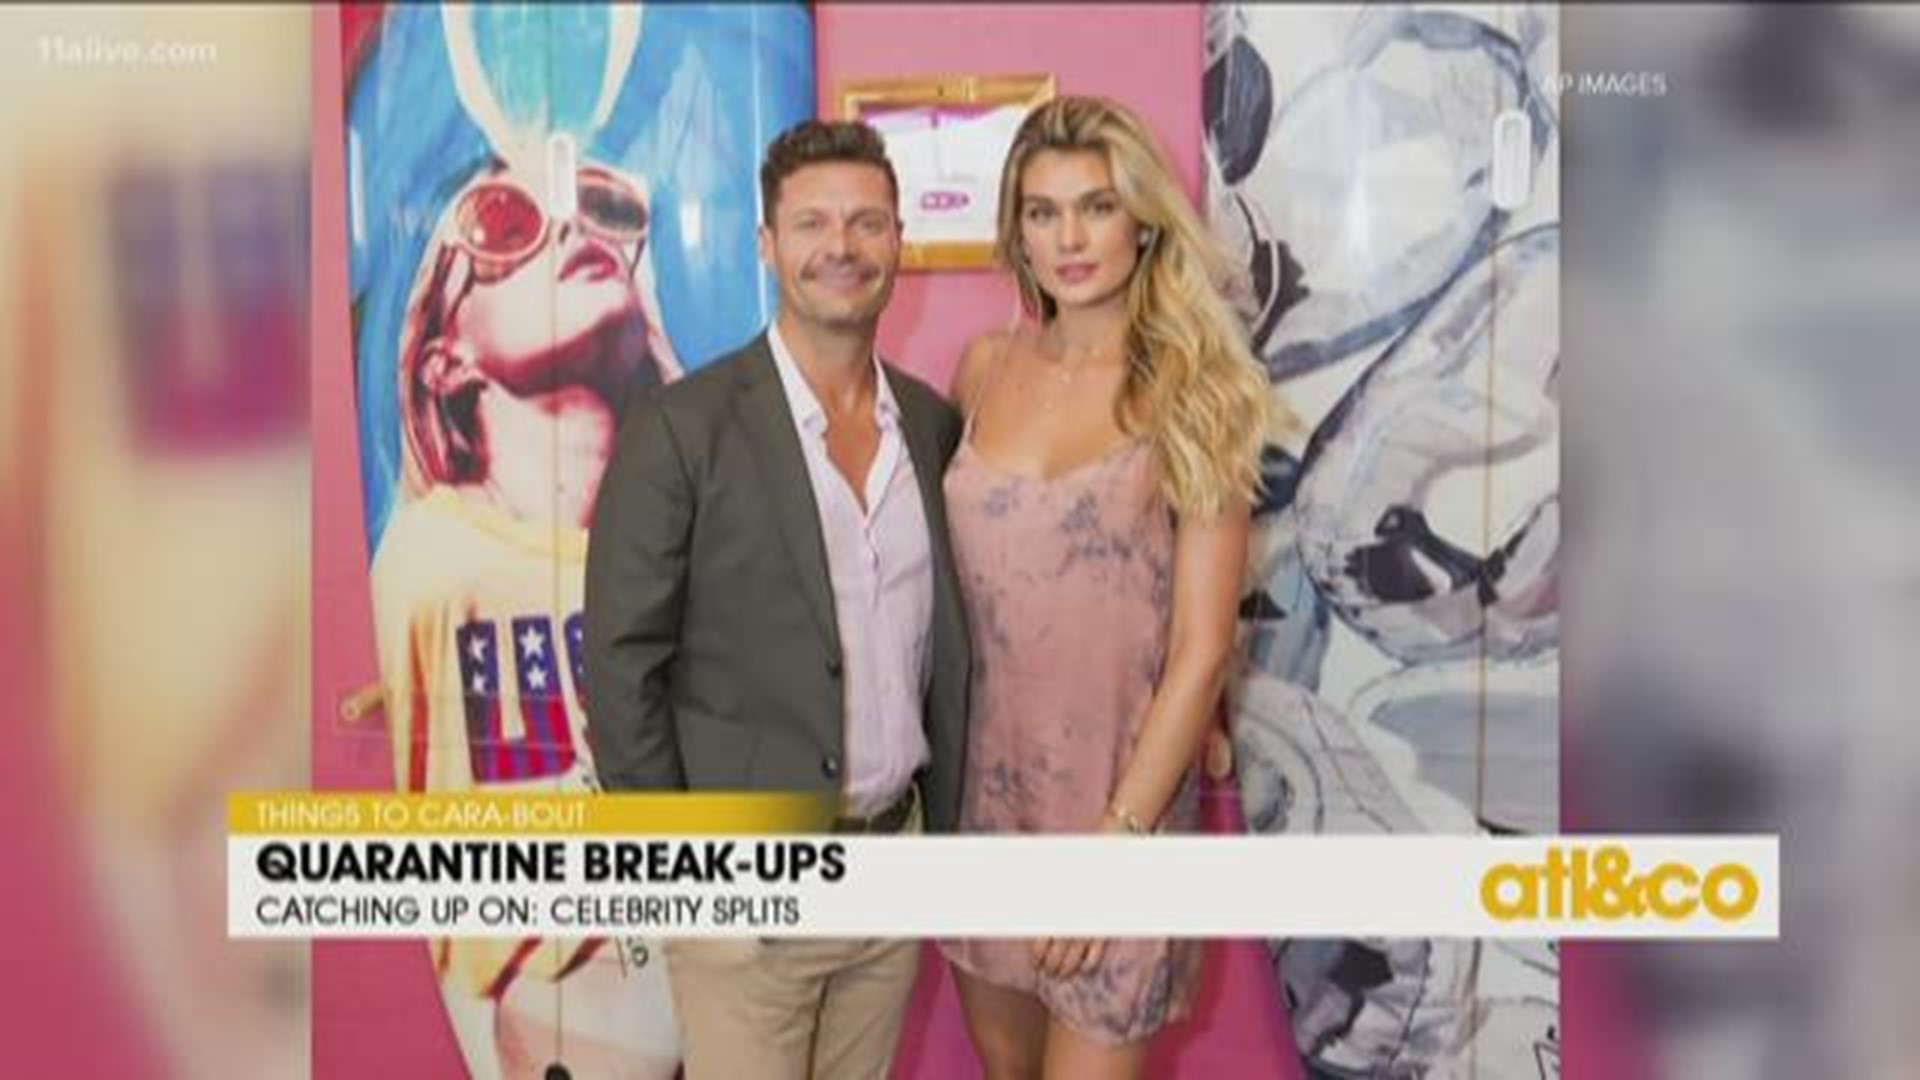 Cara Kneer shares high-profile celeb breakups and new loves in the wild era of 2020 quarantine with Christine Pullara on A&C.